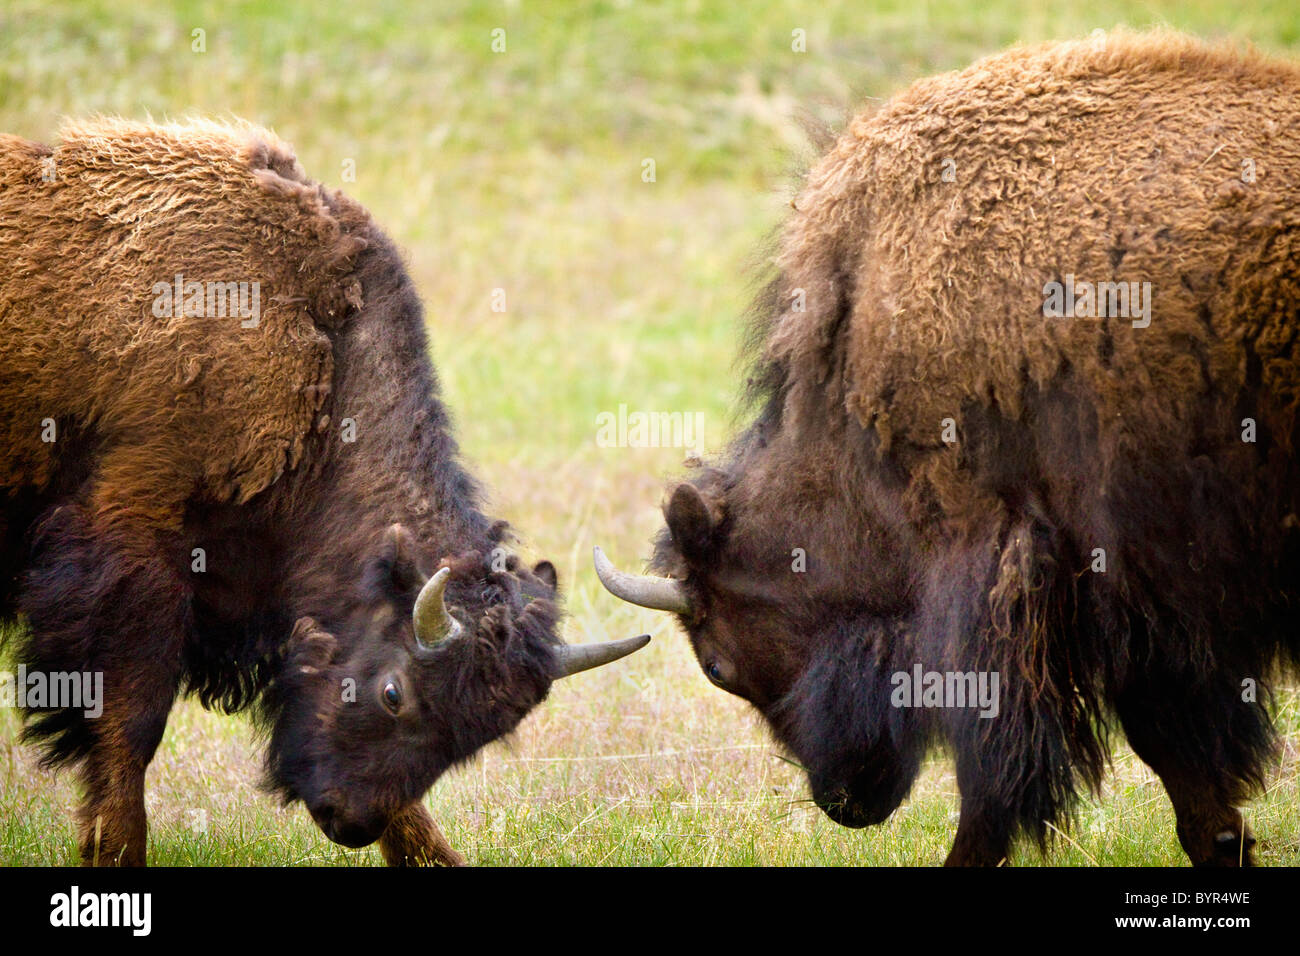 Buffalo Fighting High Resolution Stock Photography Images